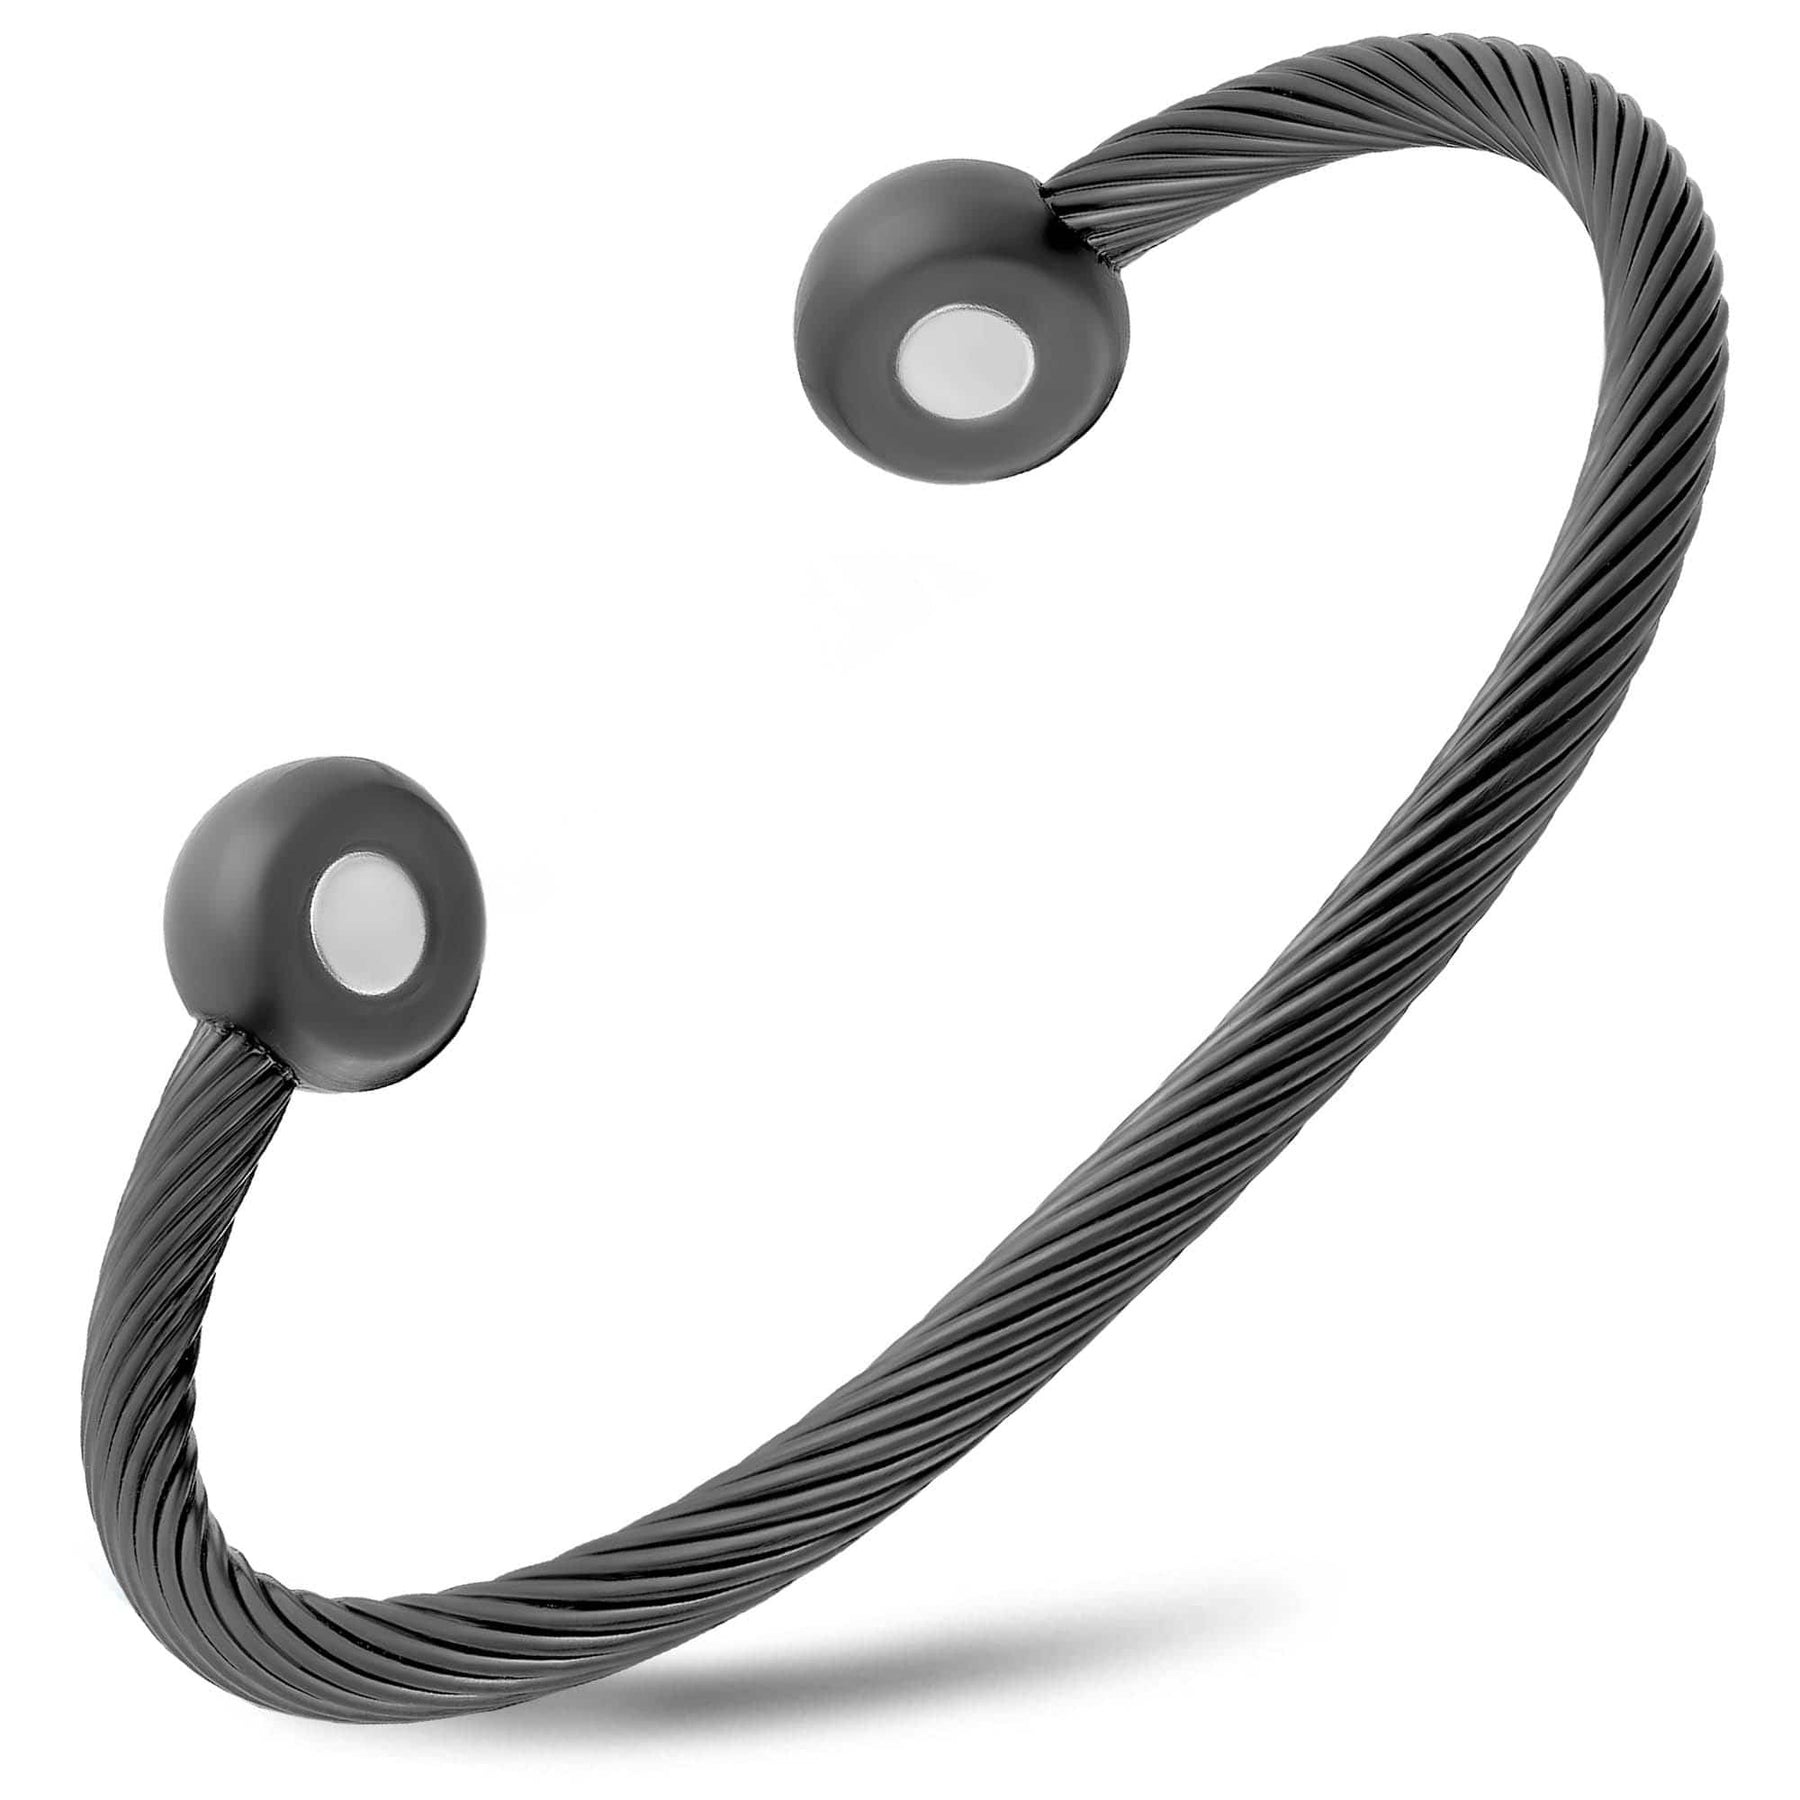 Twisted Cable Magnetic Bracelet Cuff (Gunmetal)